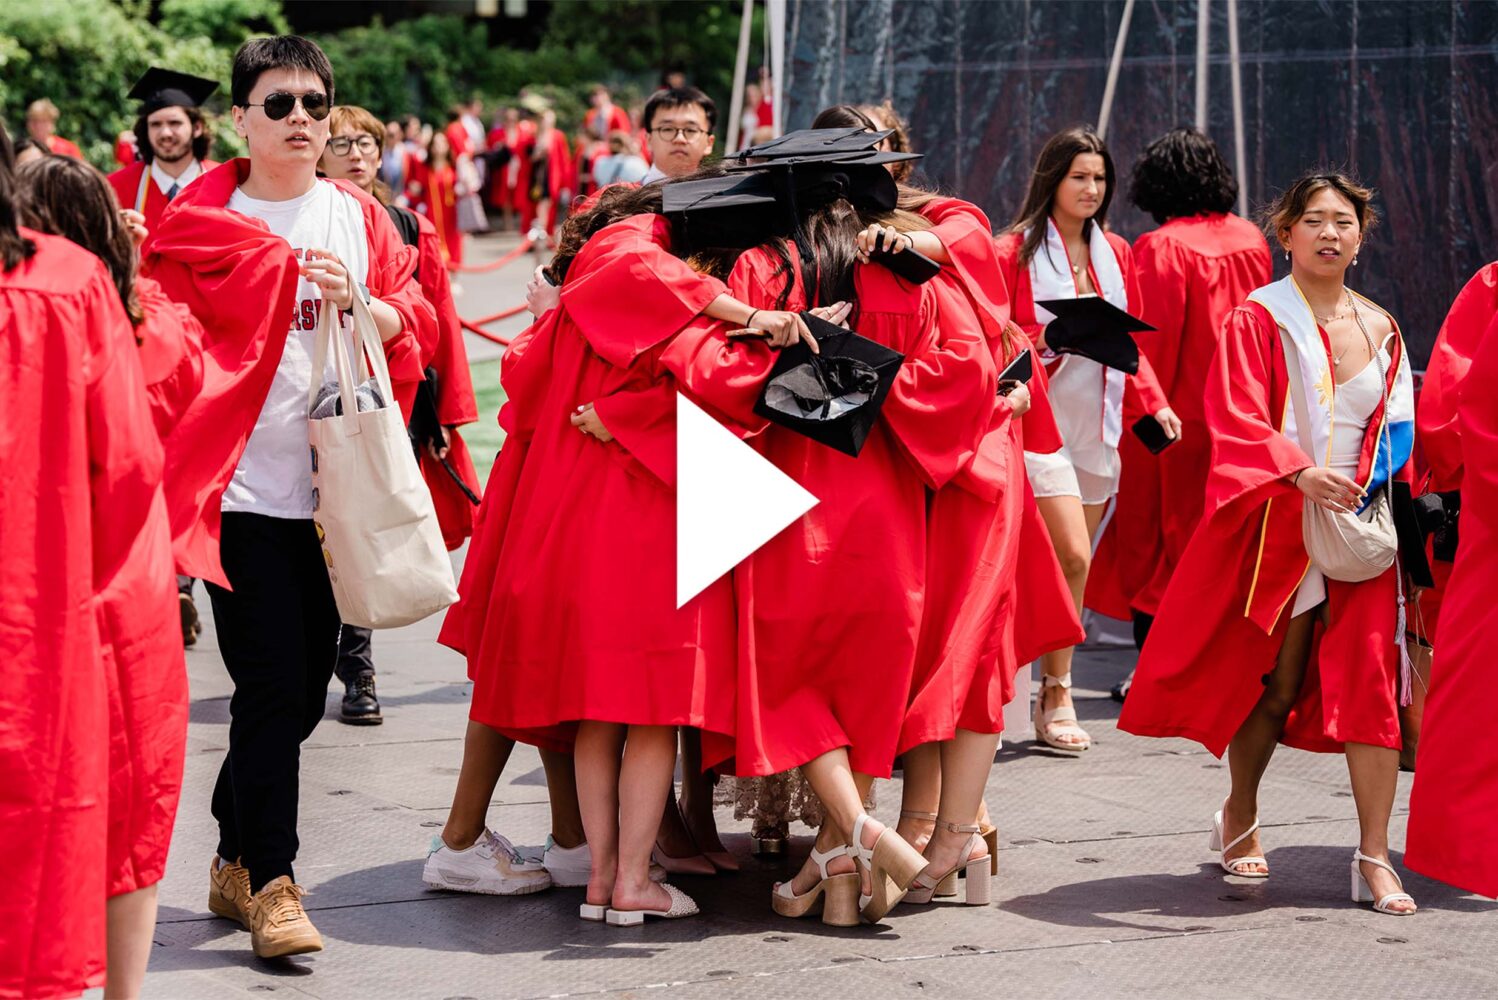 Photo: A picture of people in black graduation caps and red graduation gowns hugging in a crowd